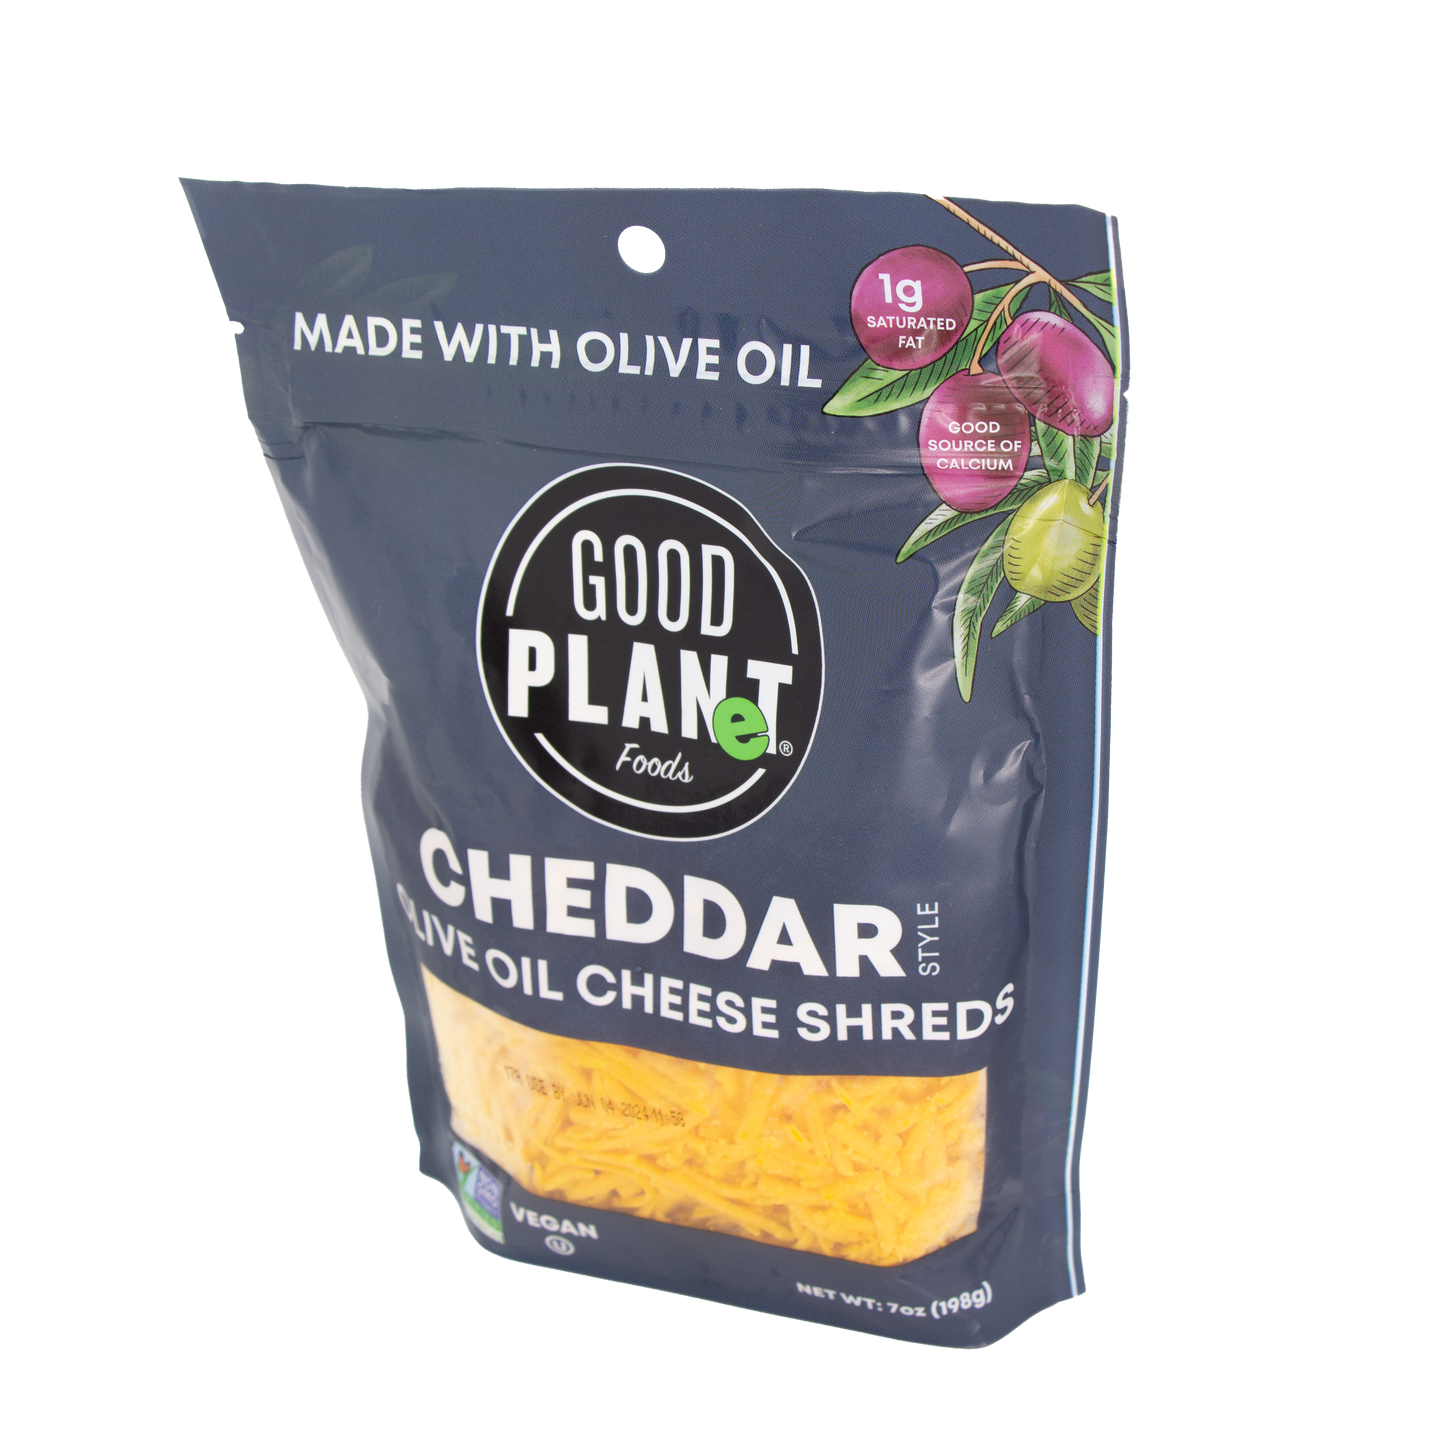 Good Planet - Cheddar Olive Oil Cheese Shreds (Store Pick-Up Only)